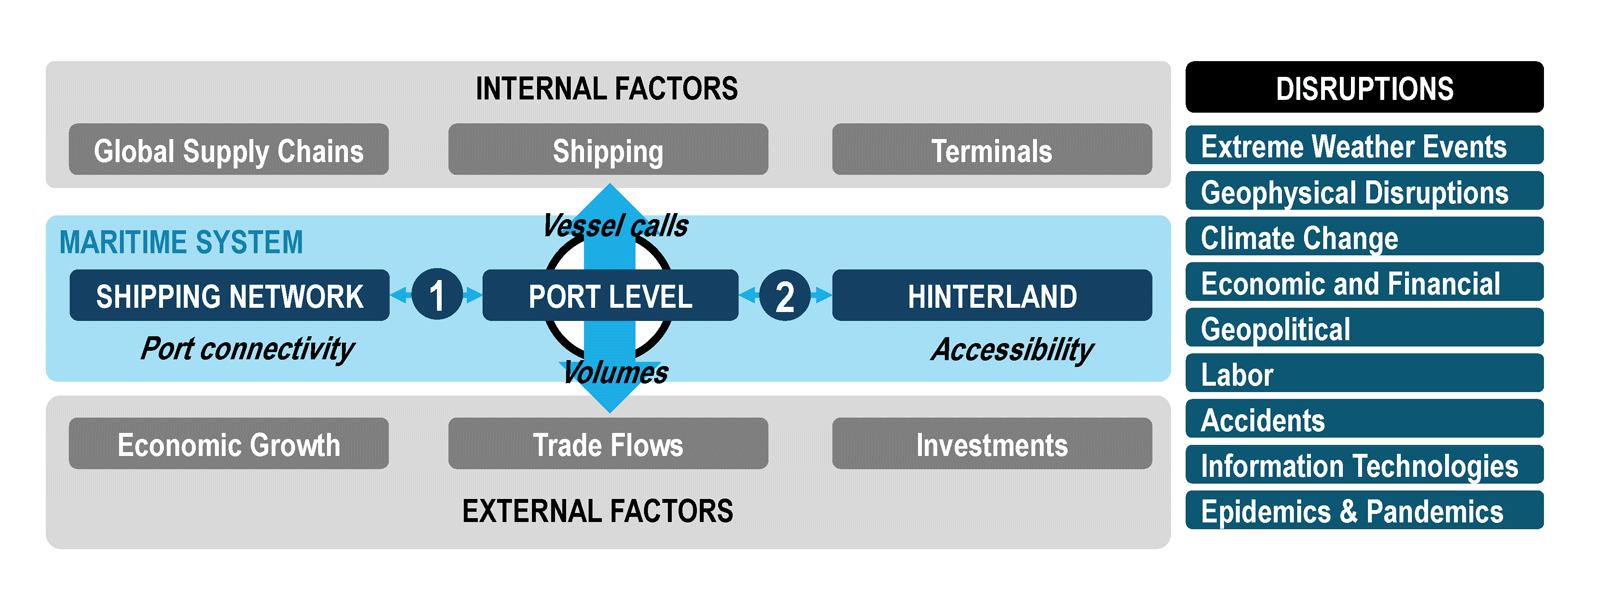 Ports in the maritime supply chain resilience landscape